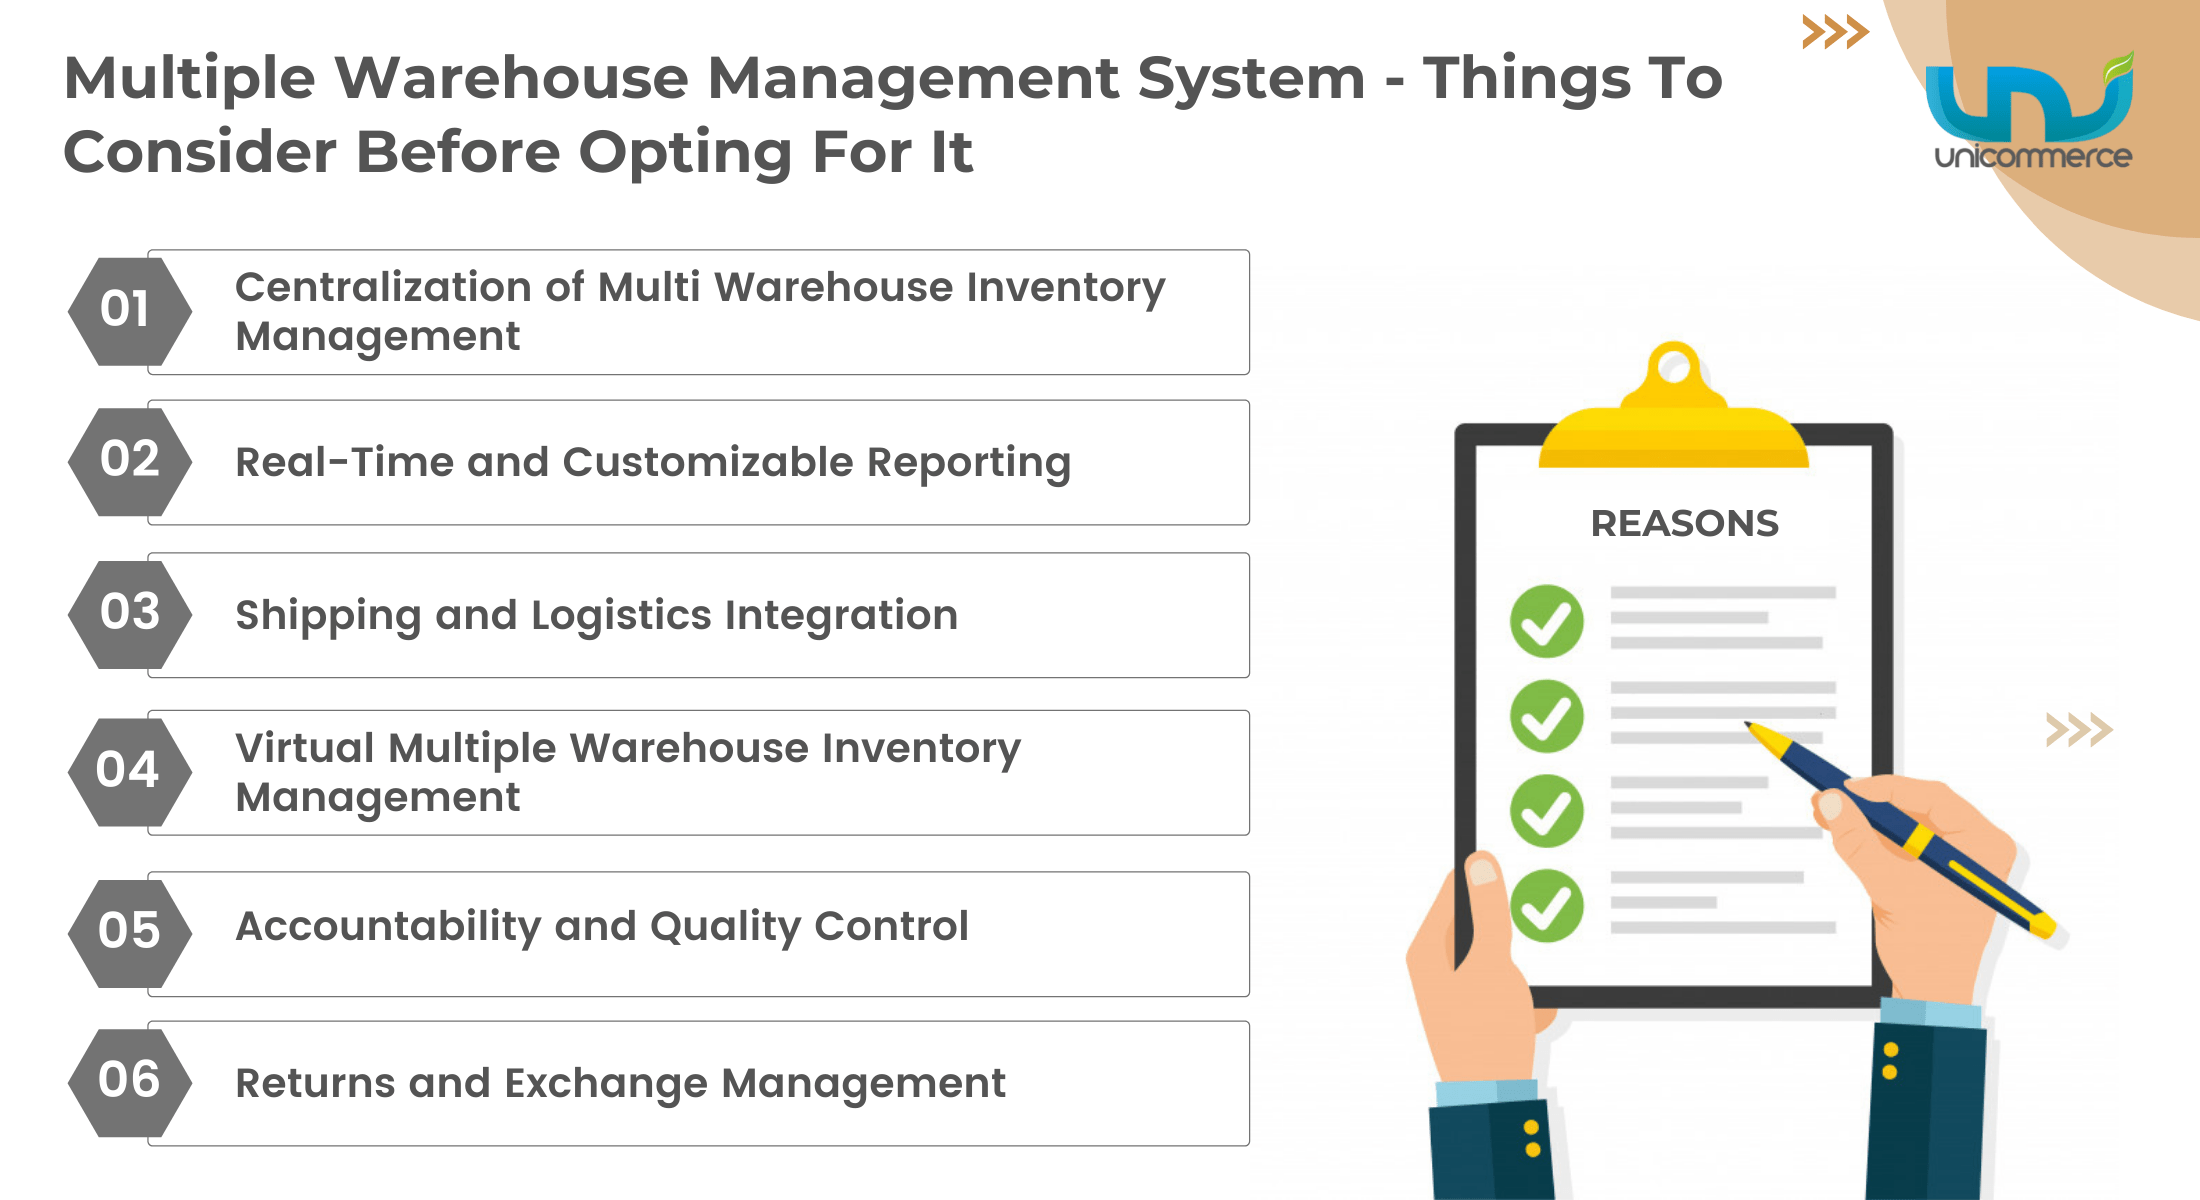 Warehouse: All-In-One Warehouse Management Solution — MoveHQ